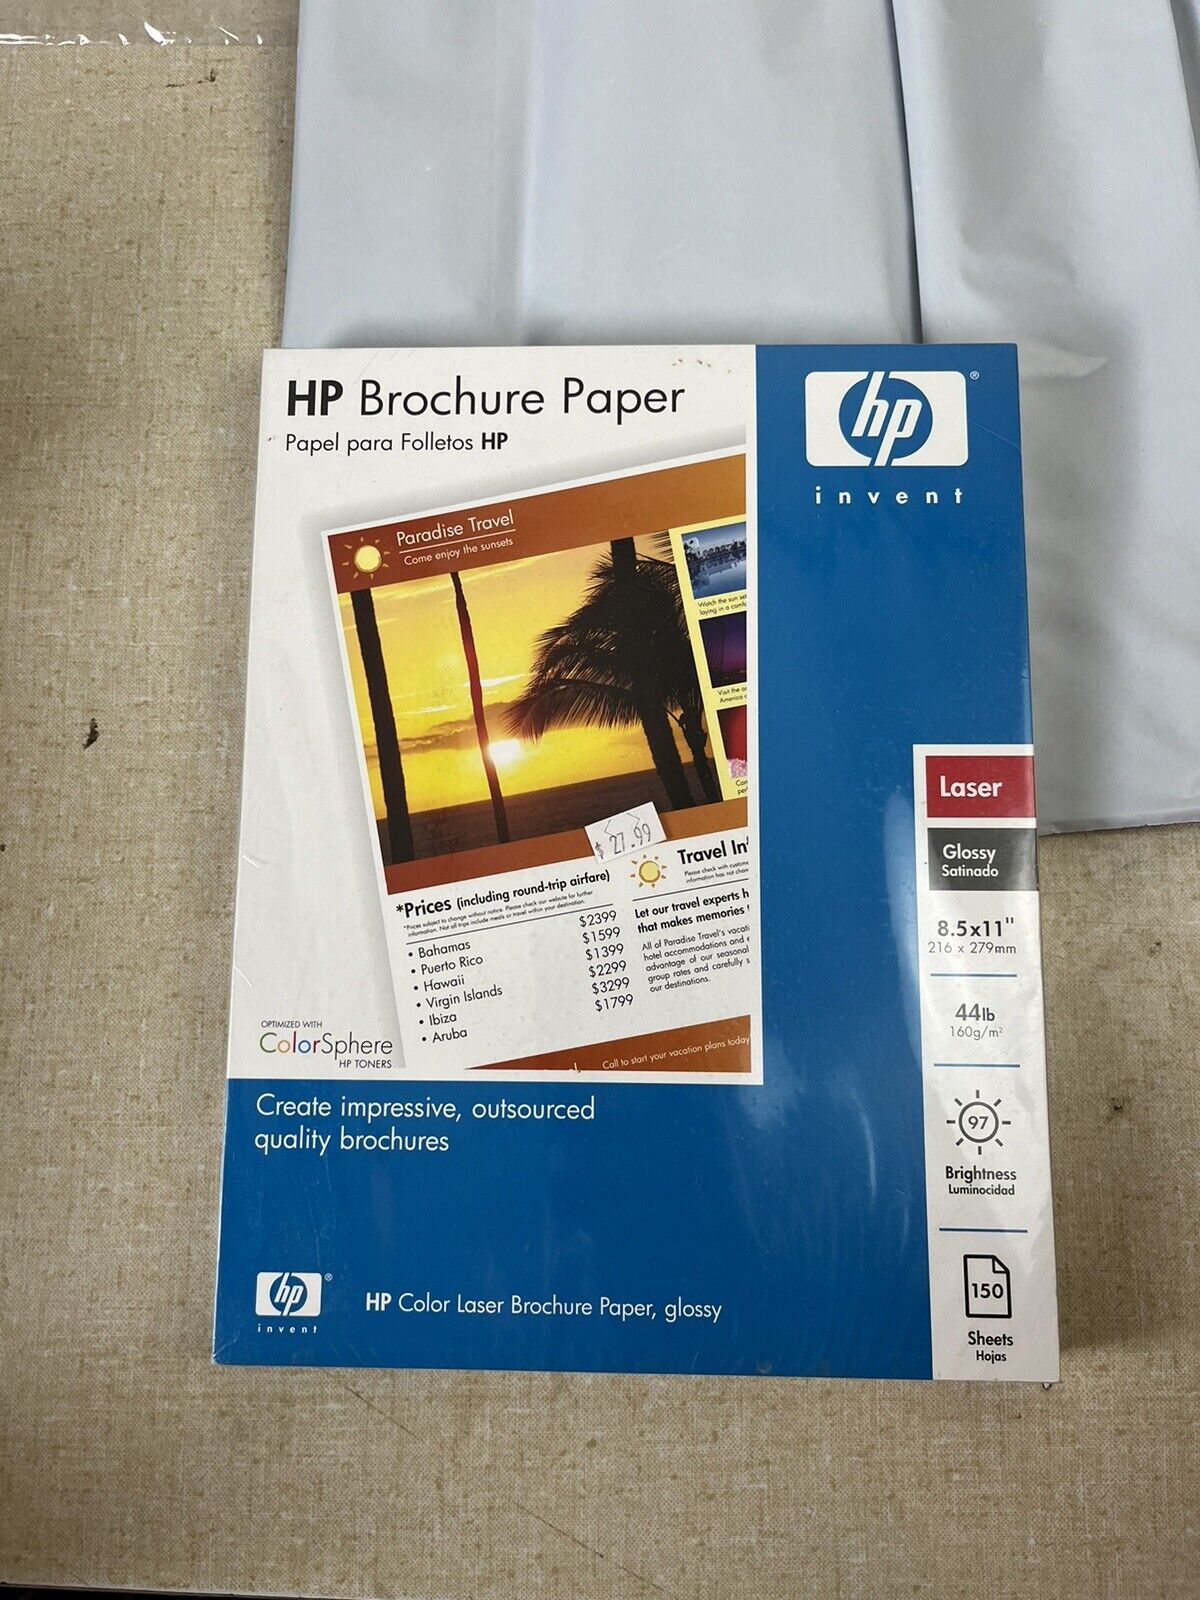 HP Brochure Paper Laser 150 Glossy Sheets 8.5x11